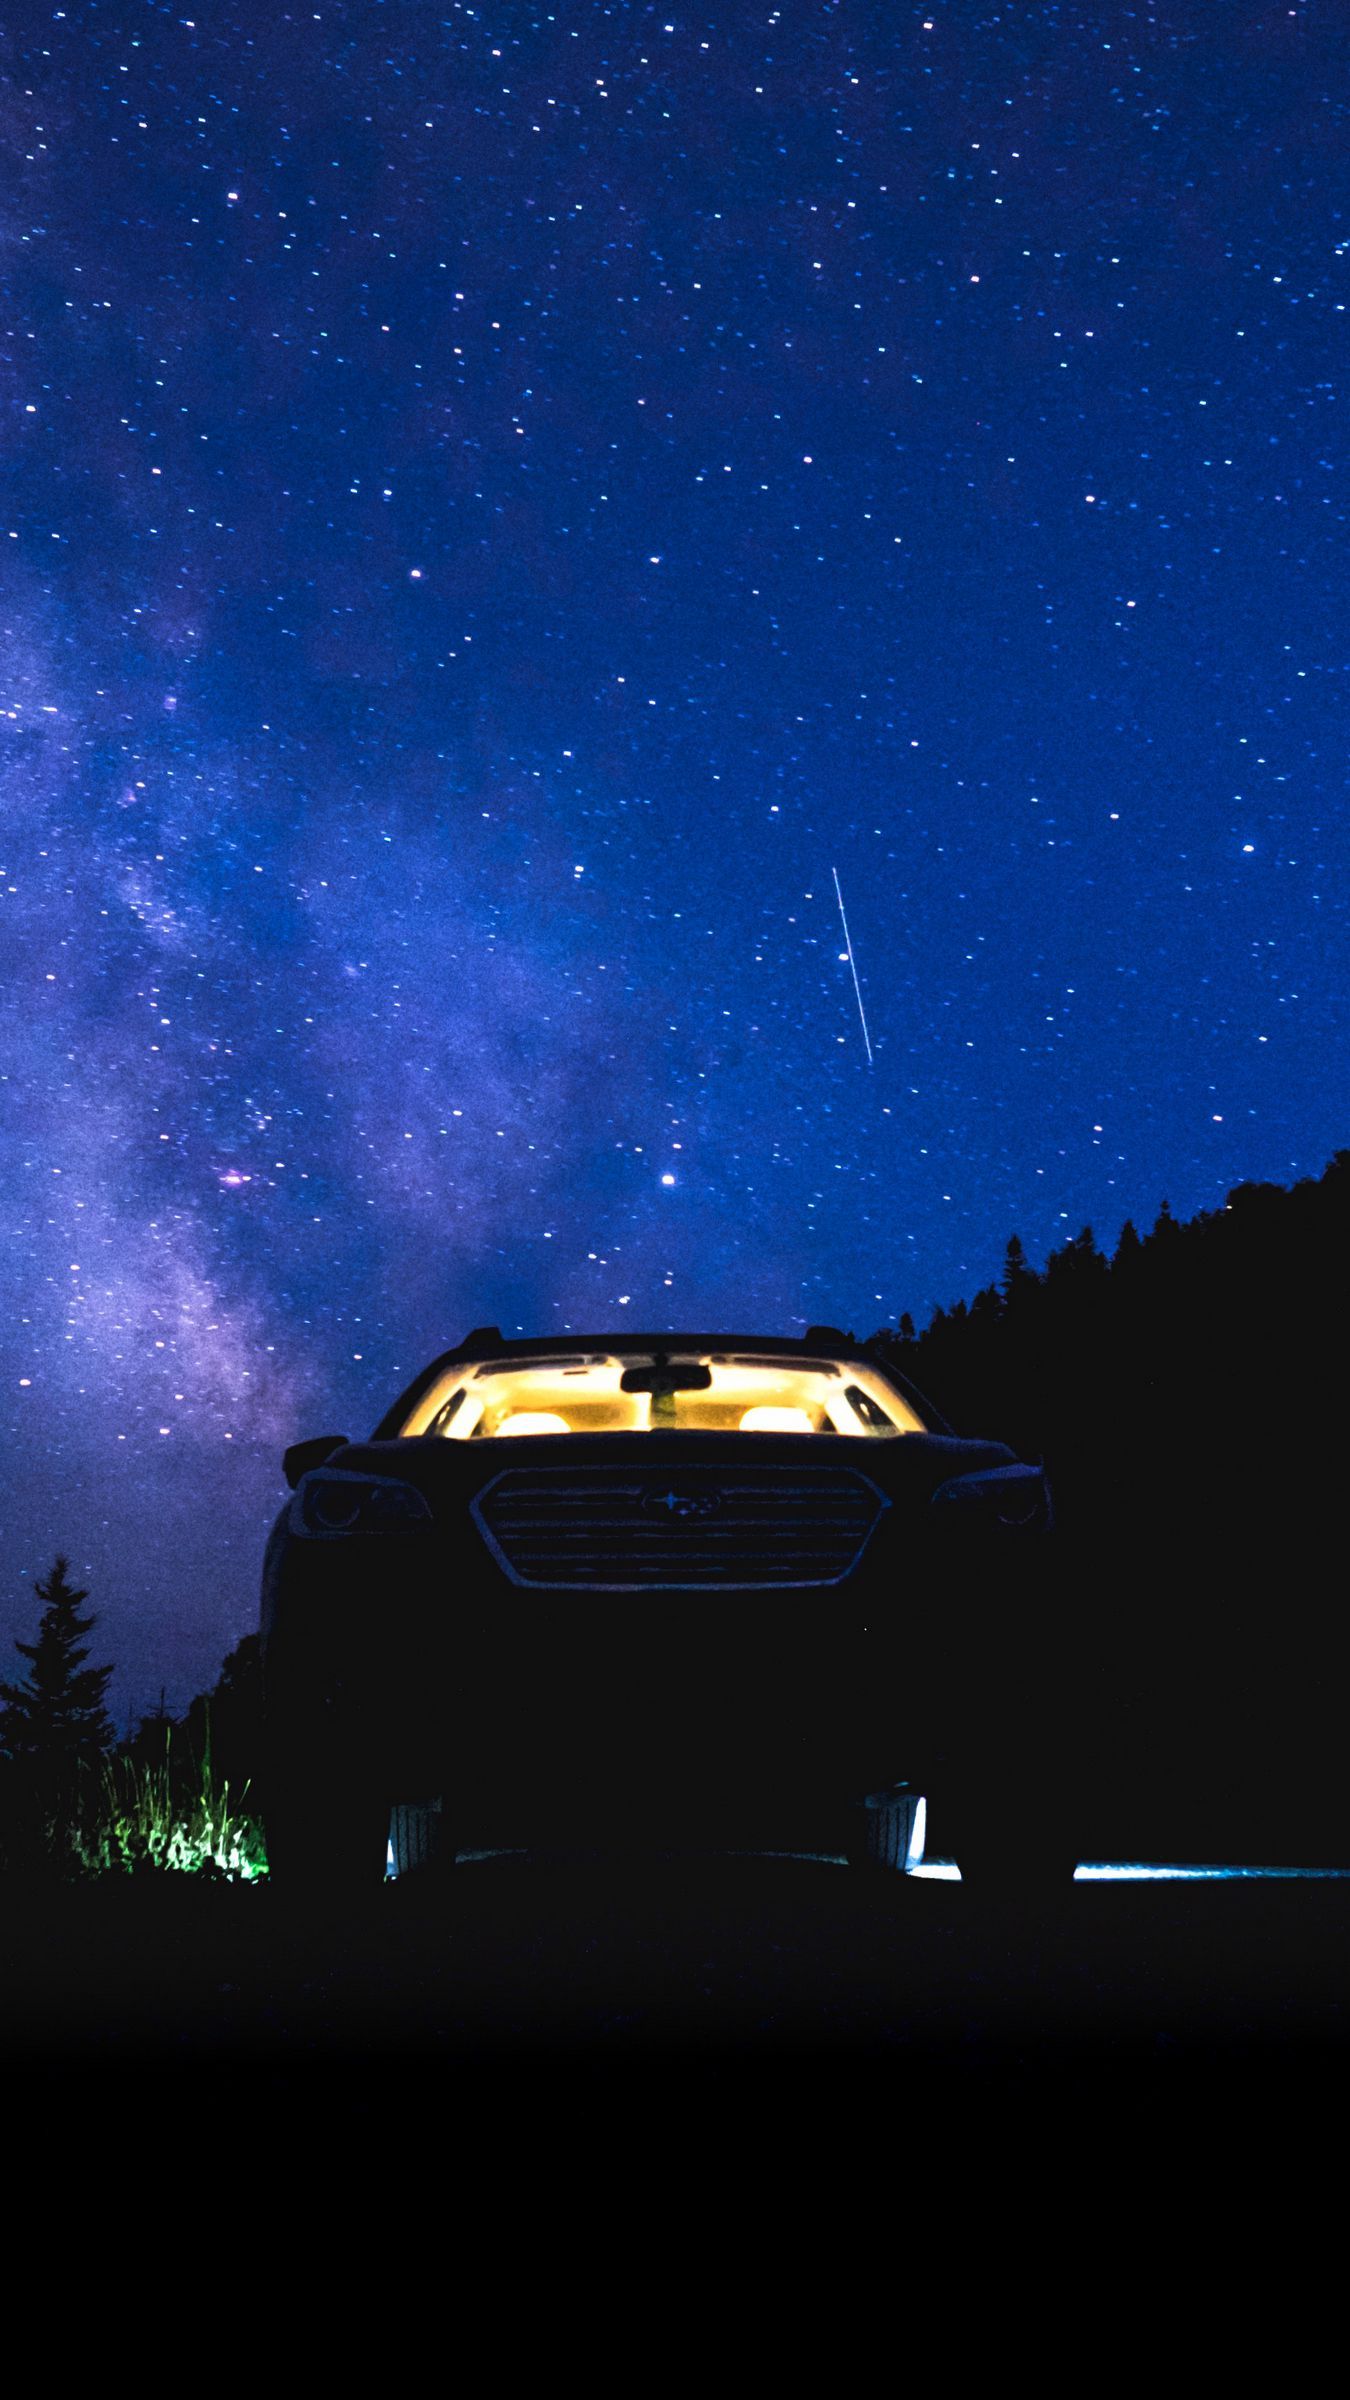 Download wallpaper 1350x2400 starry sky, night, car iphone 8+/7+/6s+/for parallax HD background